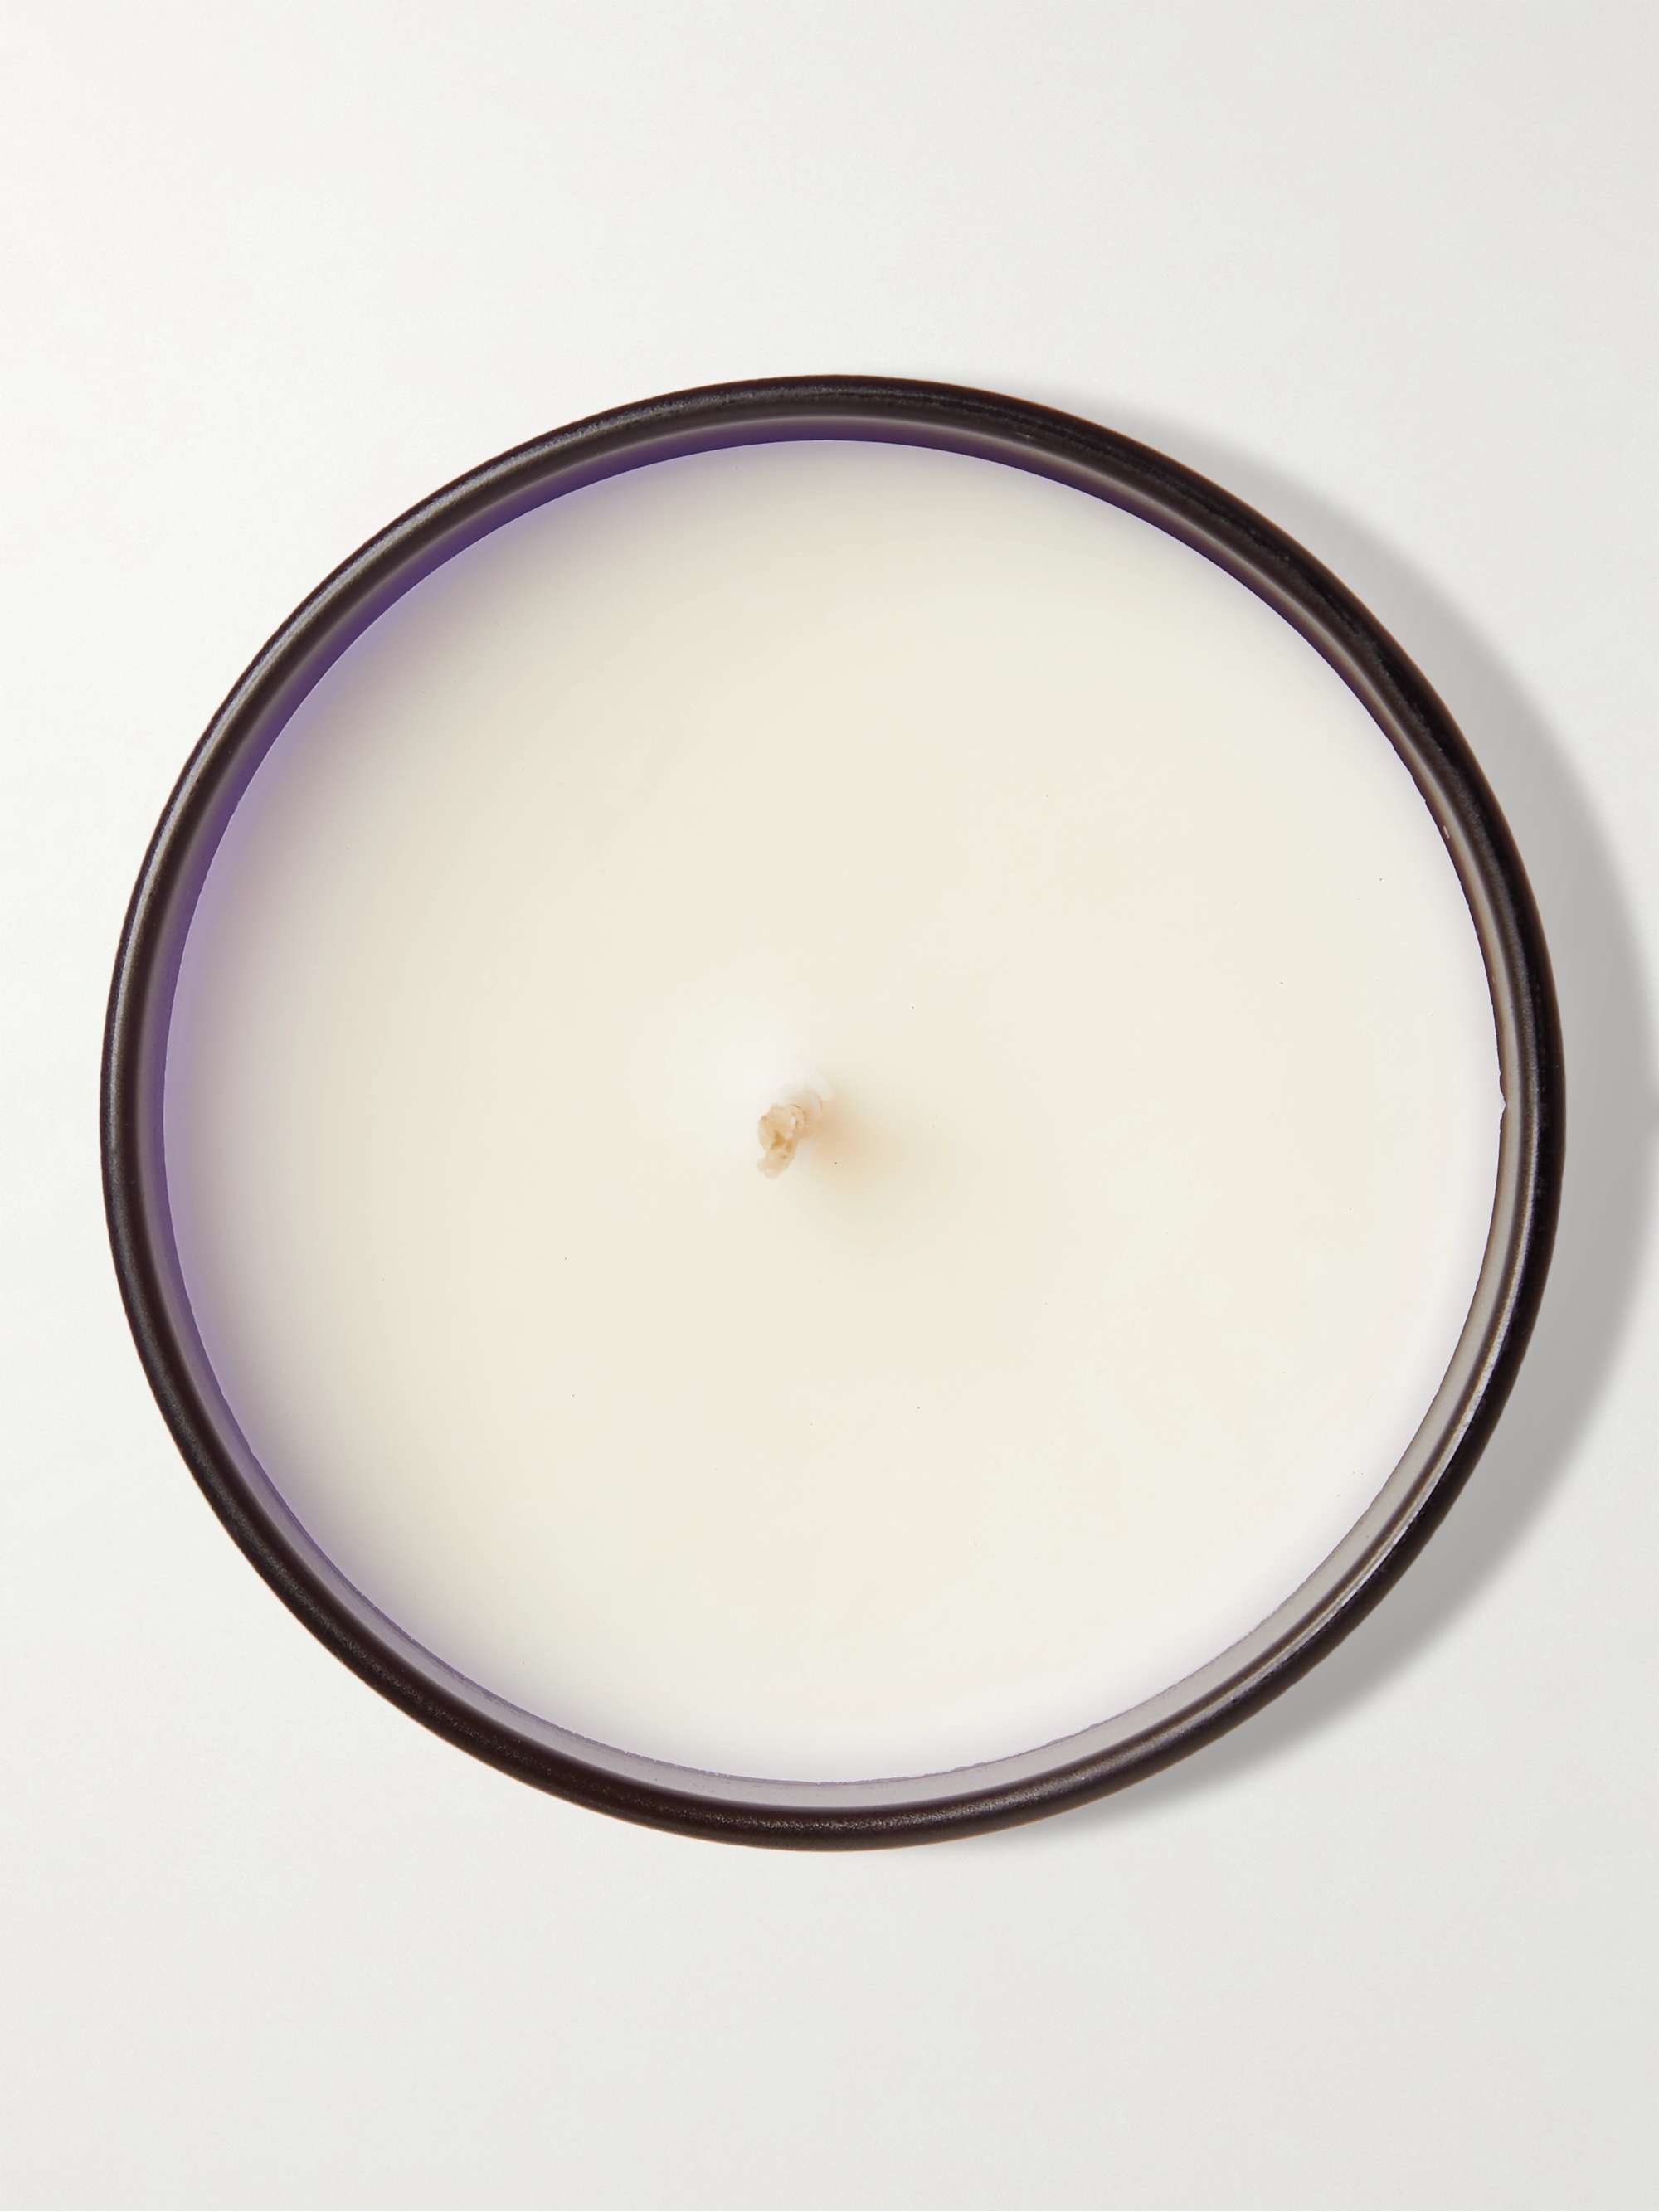 19-69 Purple Haze Scented Candle, 5300g